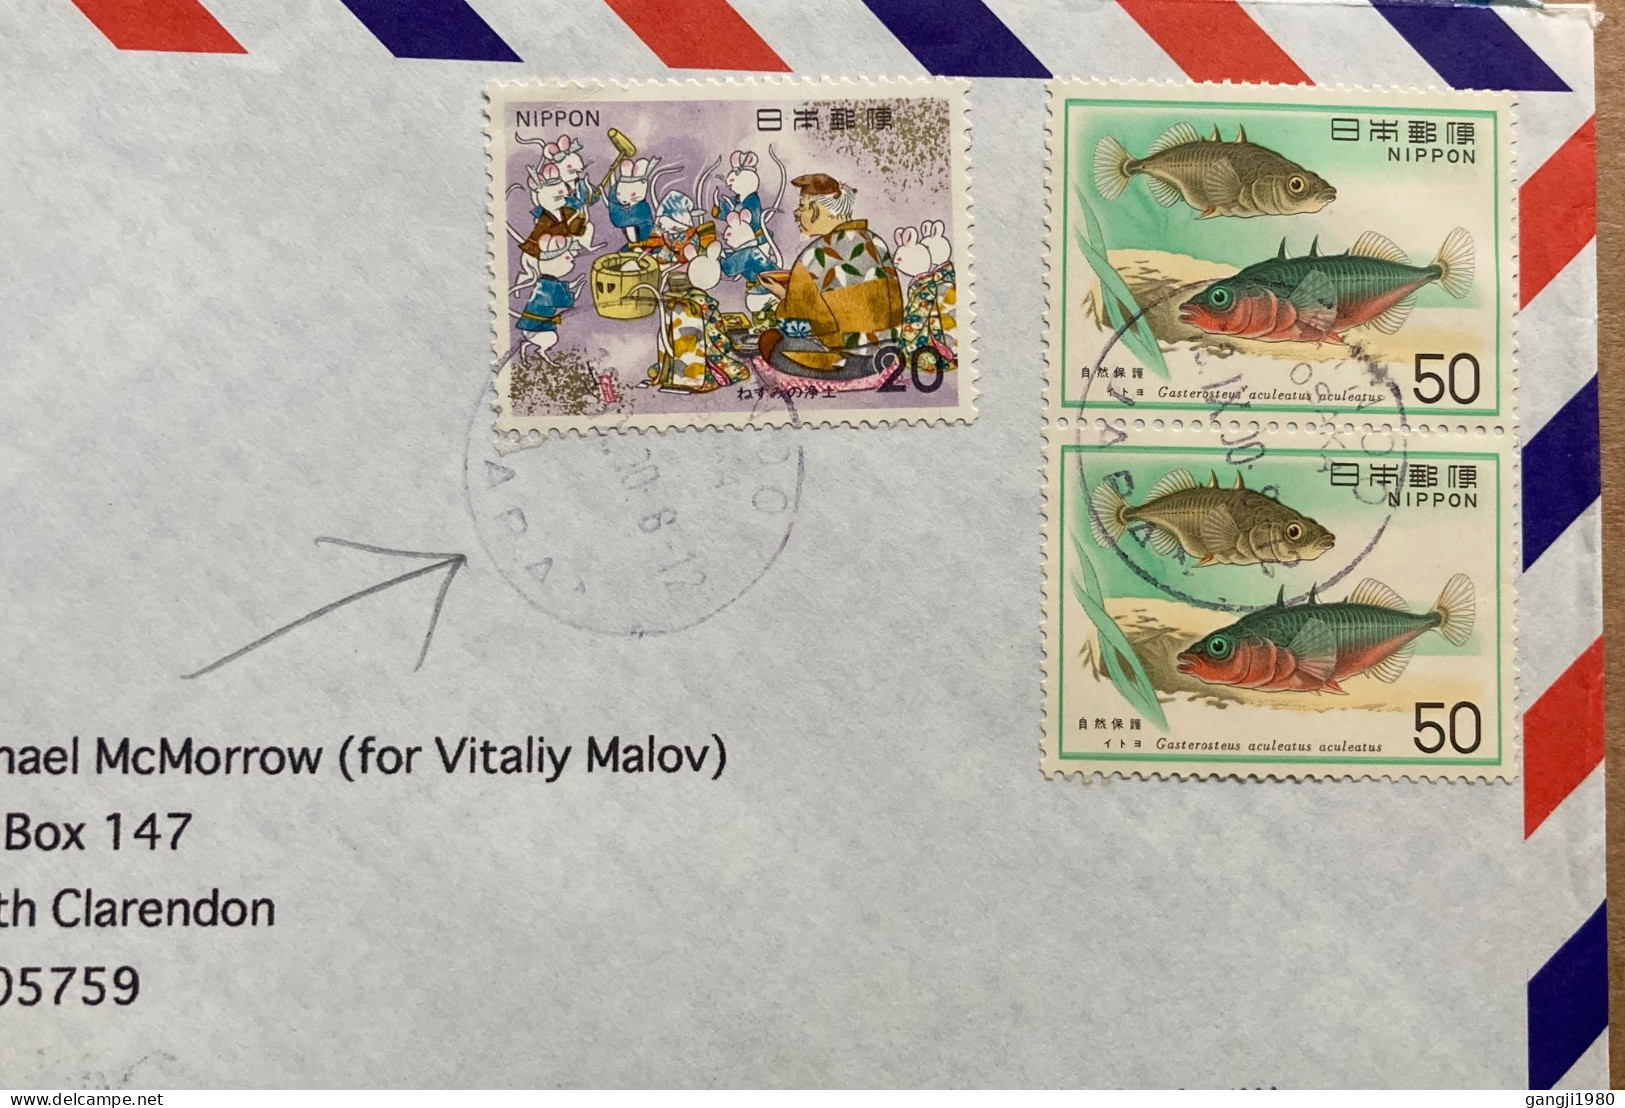 JAPAN 1980, COVER USED TO USA, DISNEY, MICKY MOUSE, FAIRY TALE, CHILDREN STORIES, FISH, 3 STAMP, MINO CITY CANCEL. - Cartas & Documentos